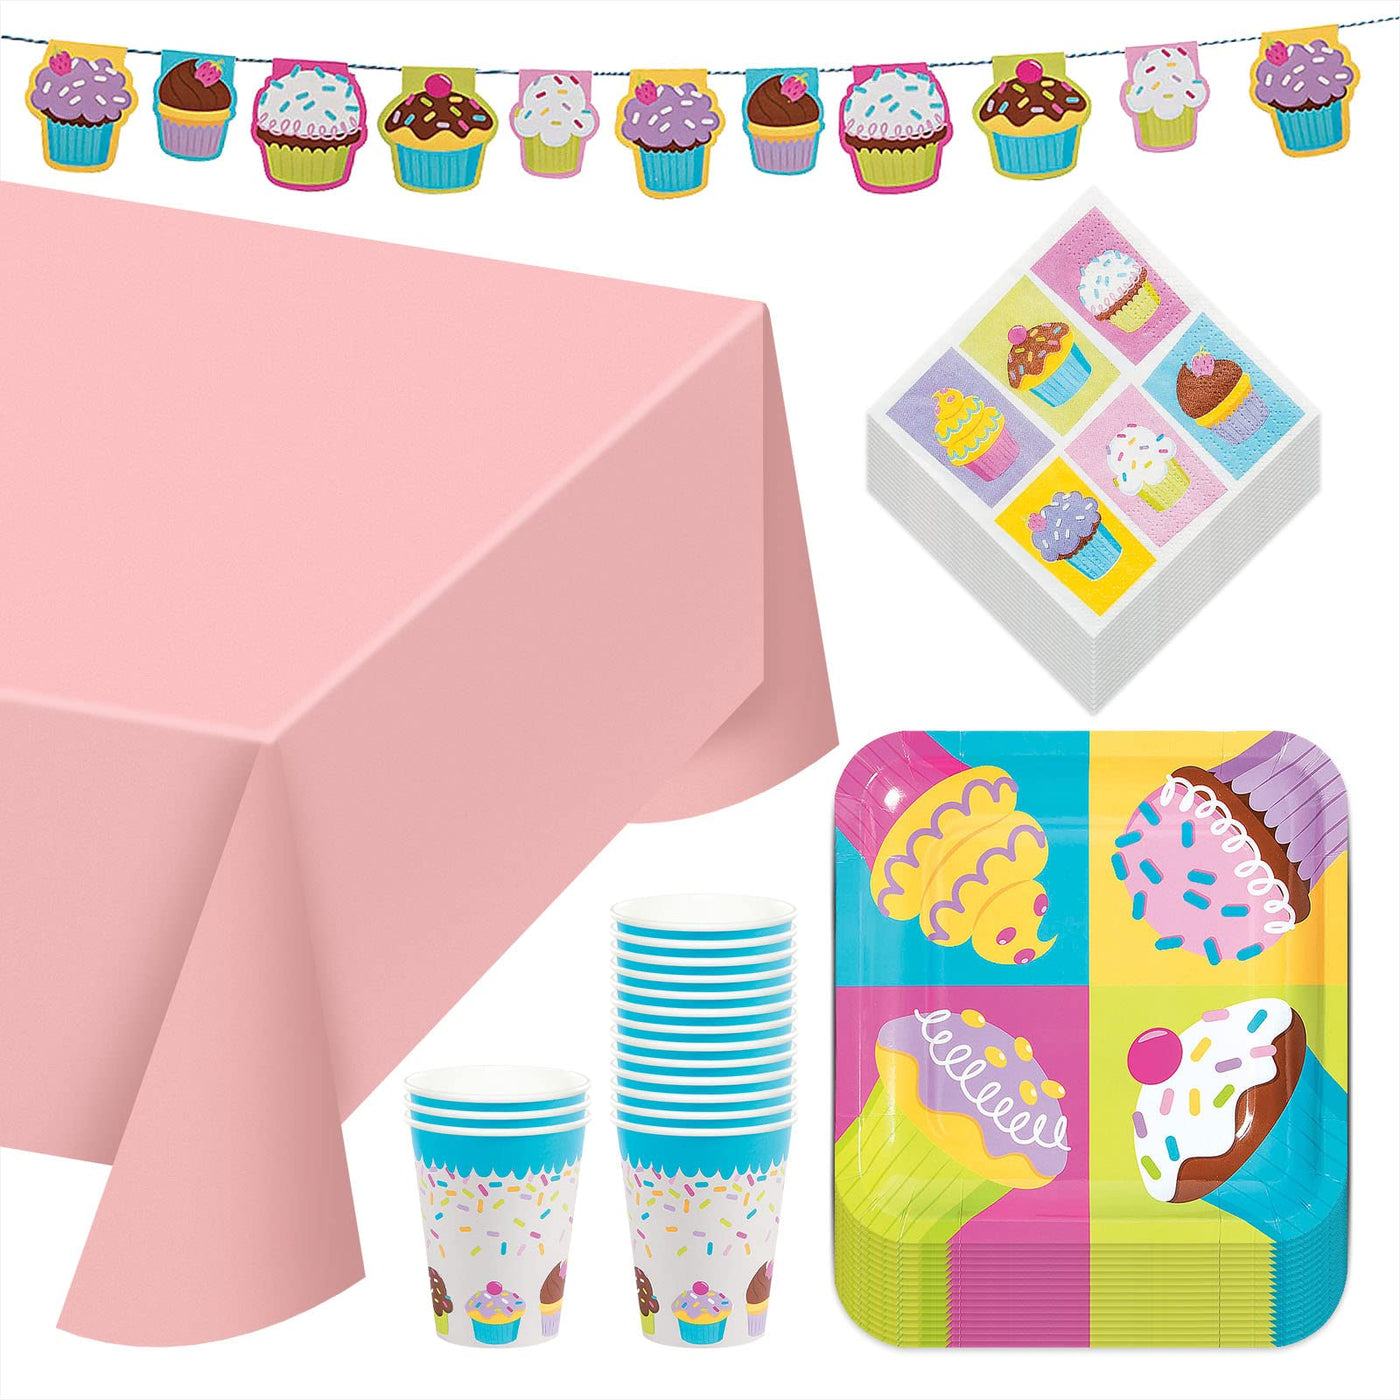 Cupcake Dinner Party Pack - Paper Plates, Lunch Napkins, Cups, Table Cover, and Garland Set (Serves 16)